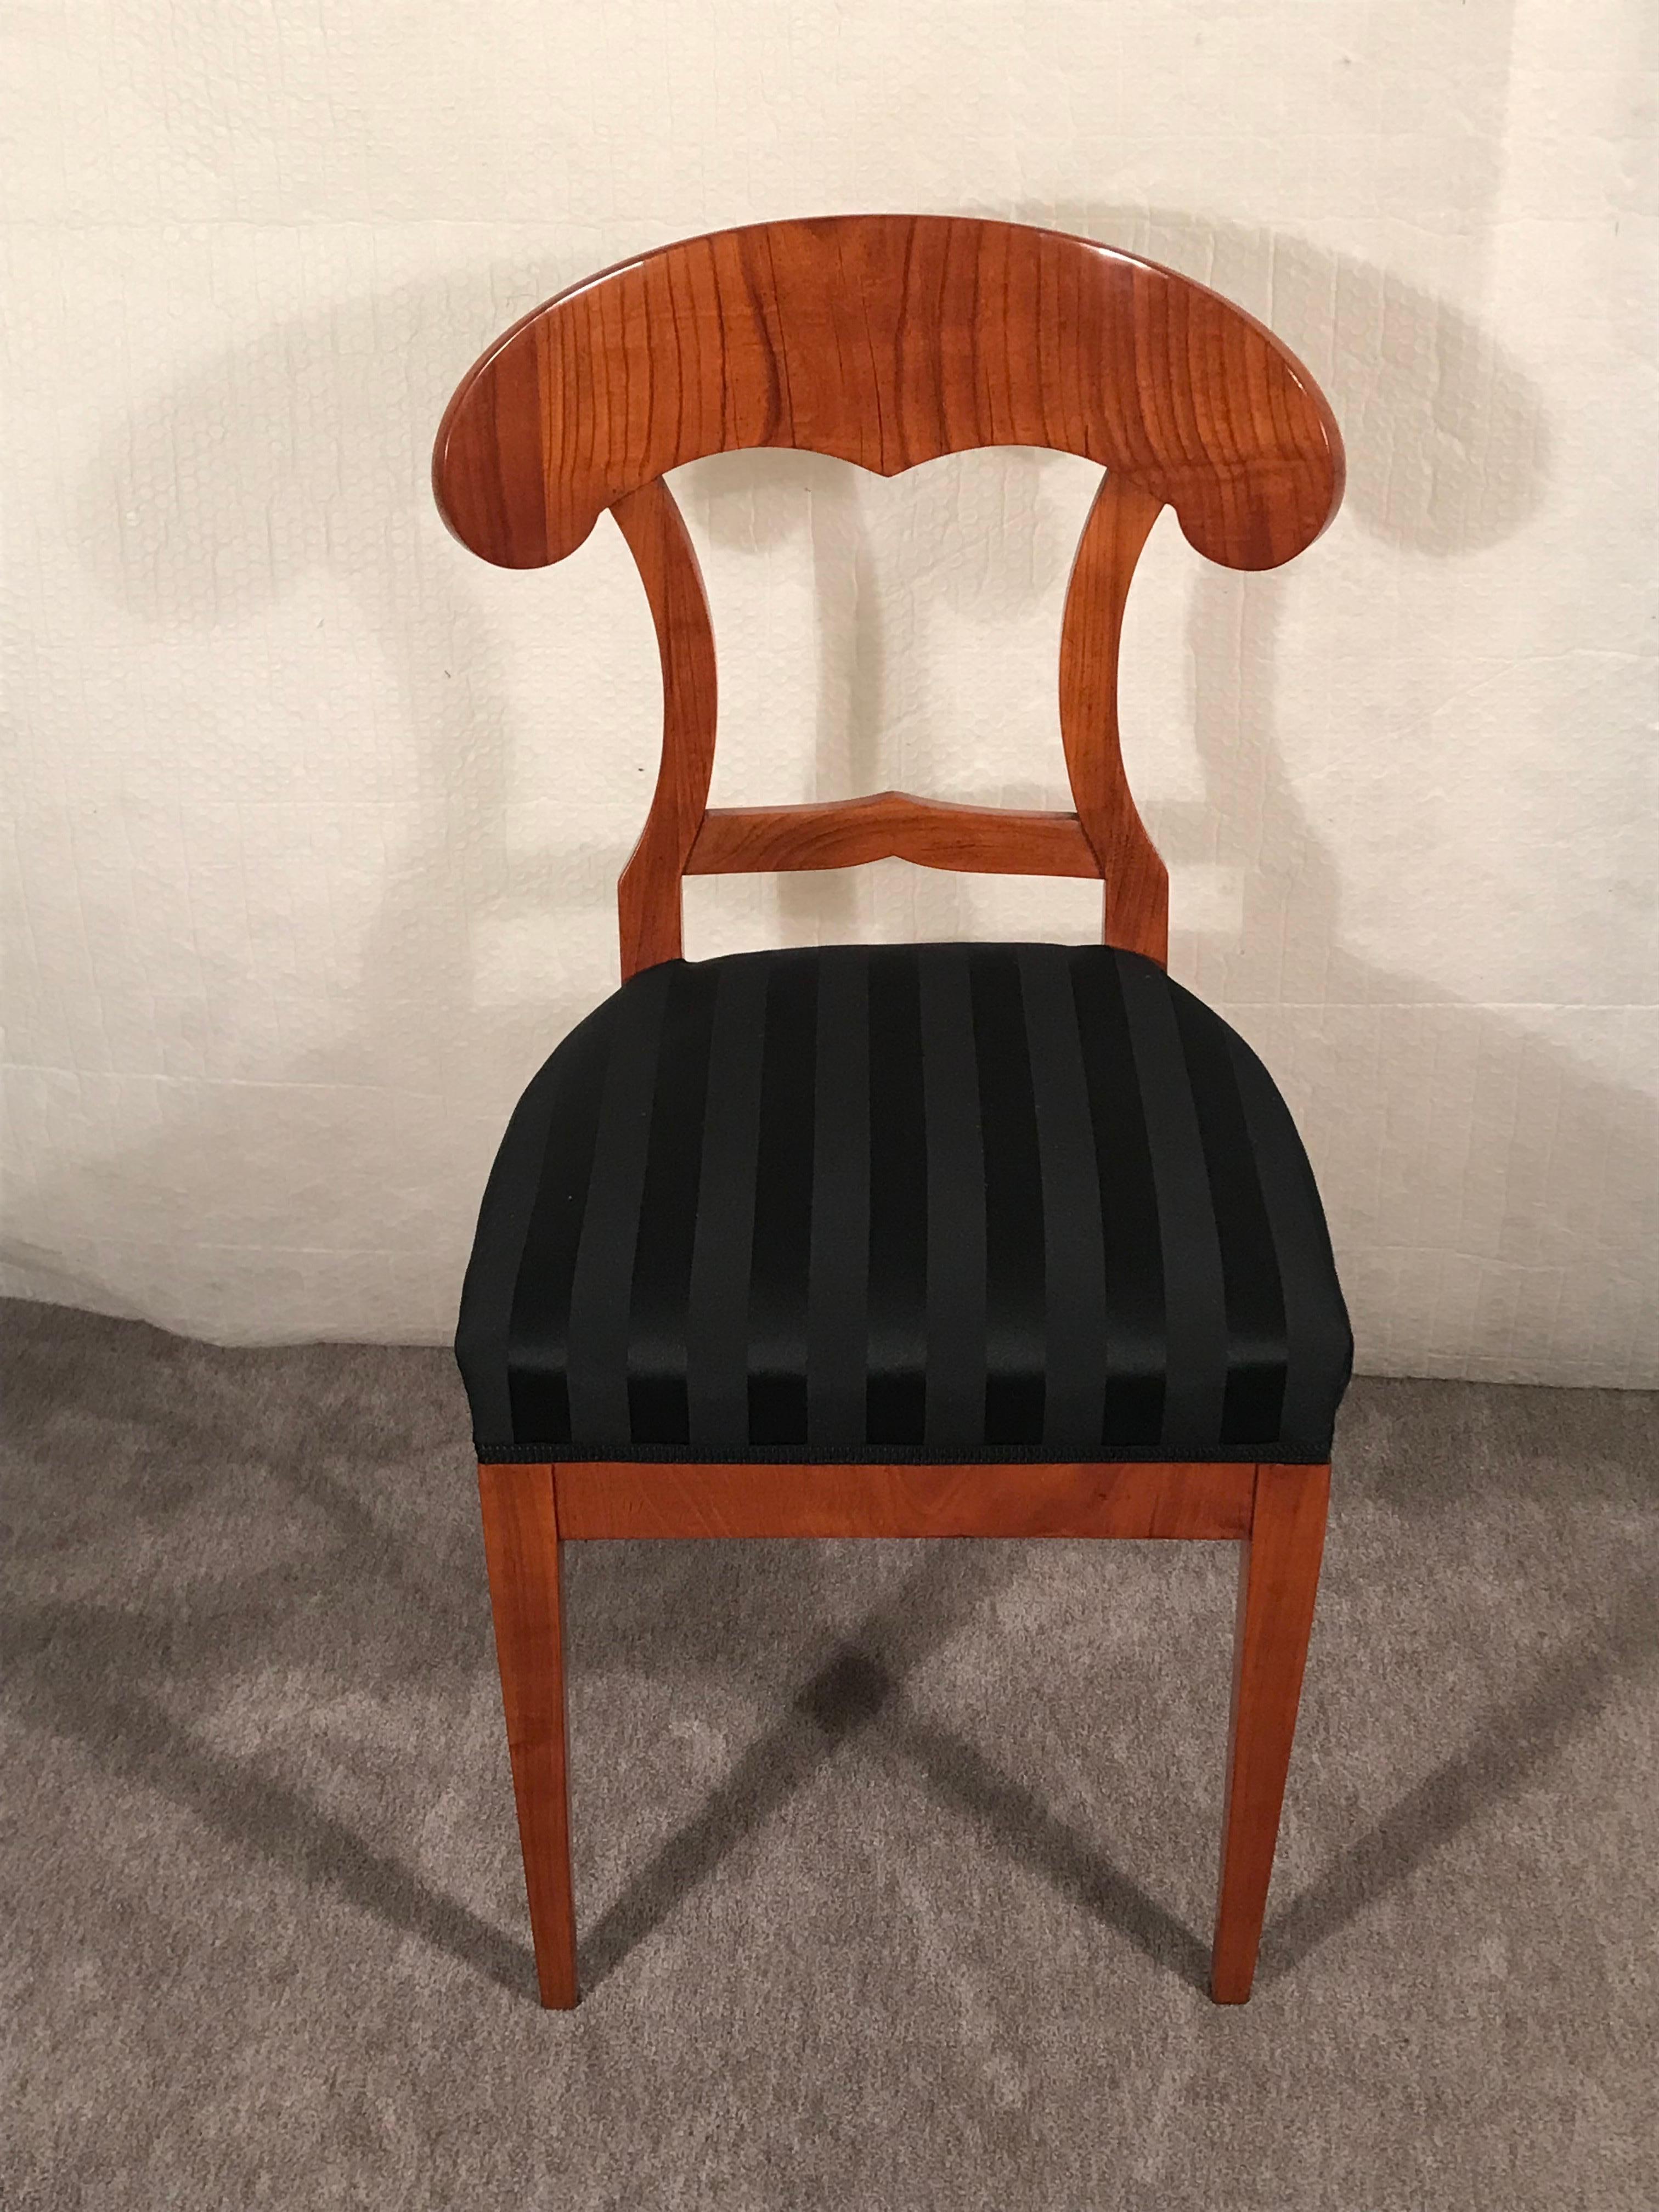 Authentic set of six Biedermeier chairs, meticulously preserved since their creation in 1820. Originating from Germany, they bear witness to the exceptional craftsmanship of the era.
Each chair features a distinctive shovel backrest, adding a touch